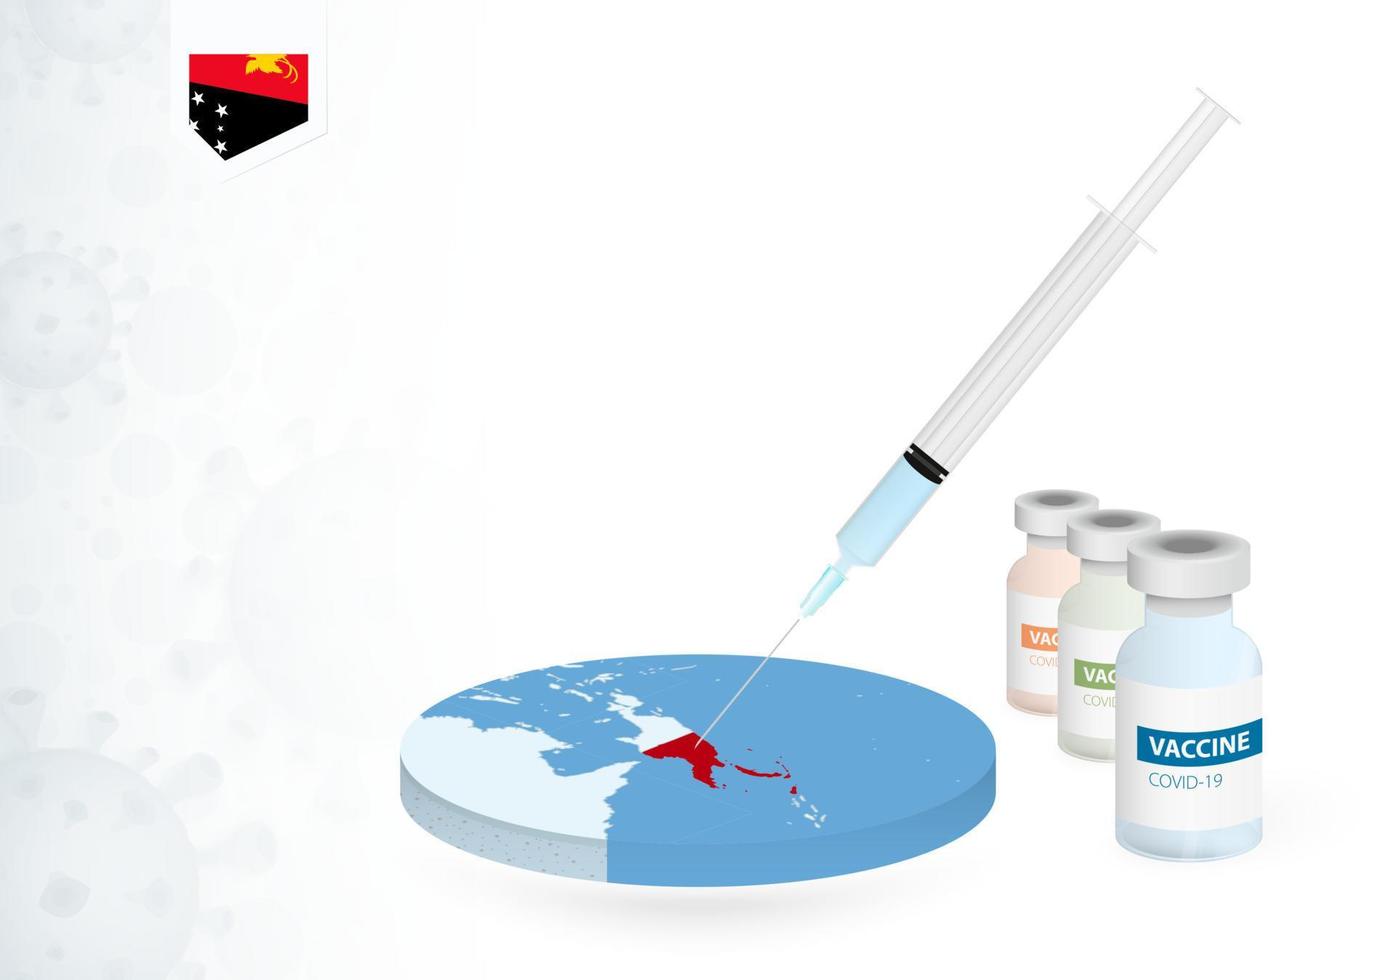 Vaccination in Papua New Guinea with different type of COVID-19 vaccine. Concept with the vaccine injection in the map of Papua New Guinea. vector